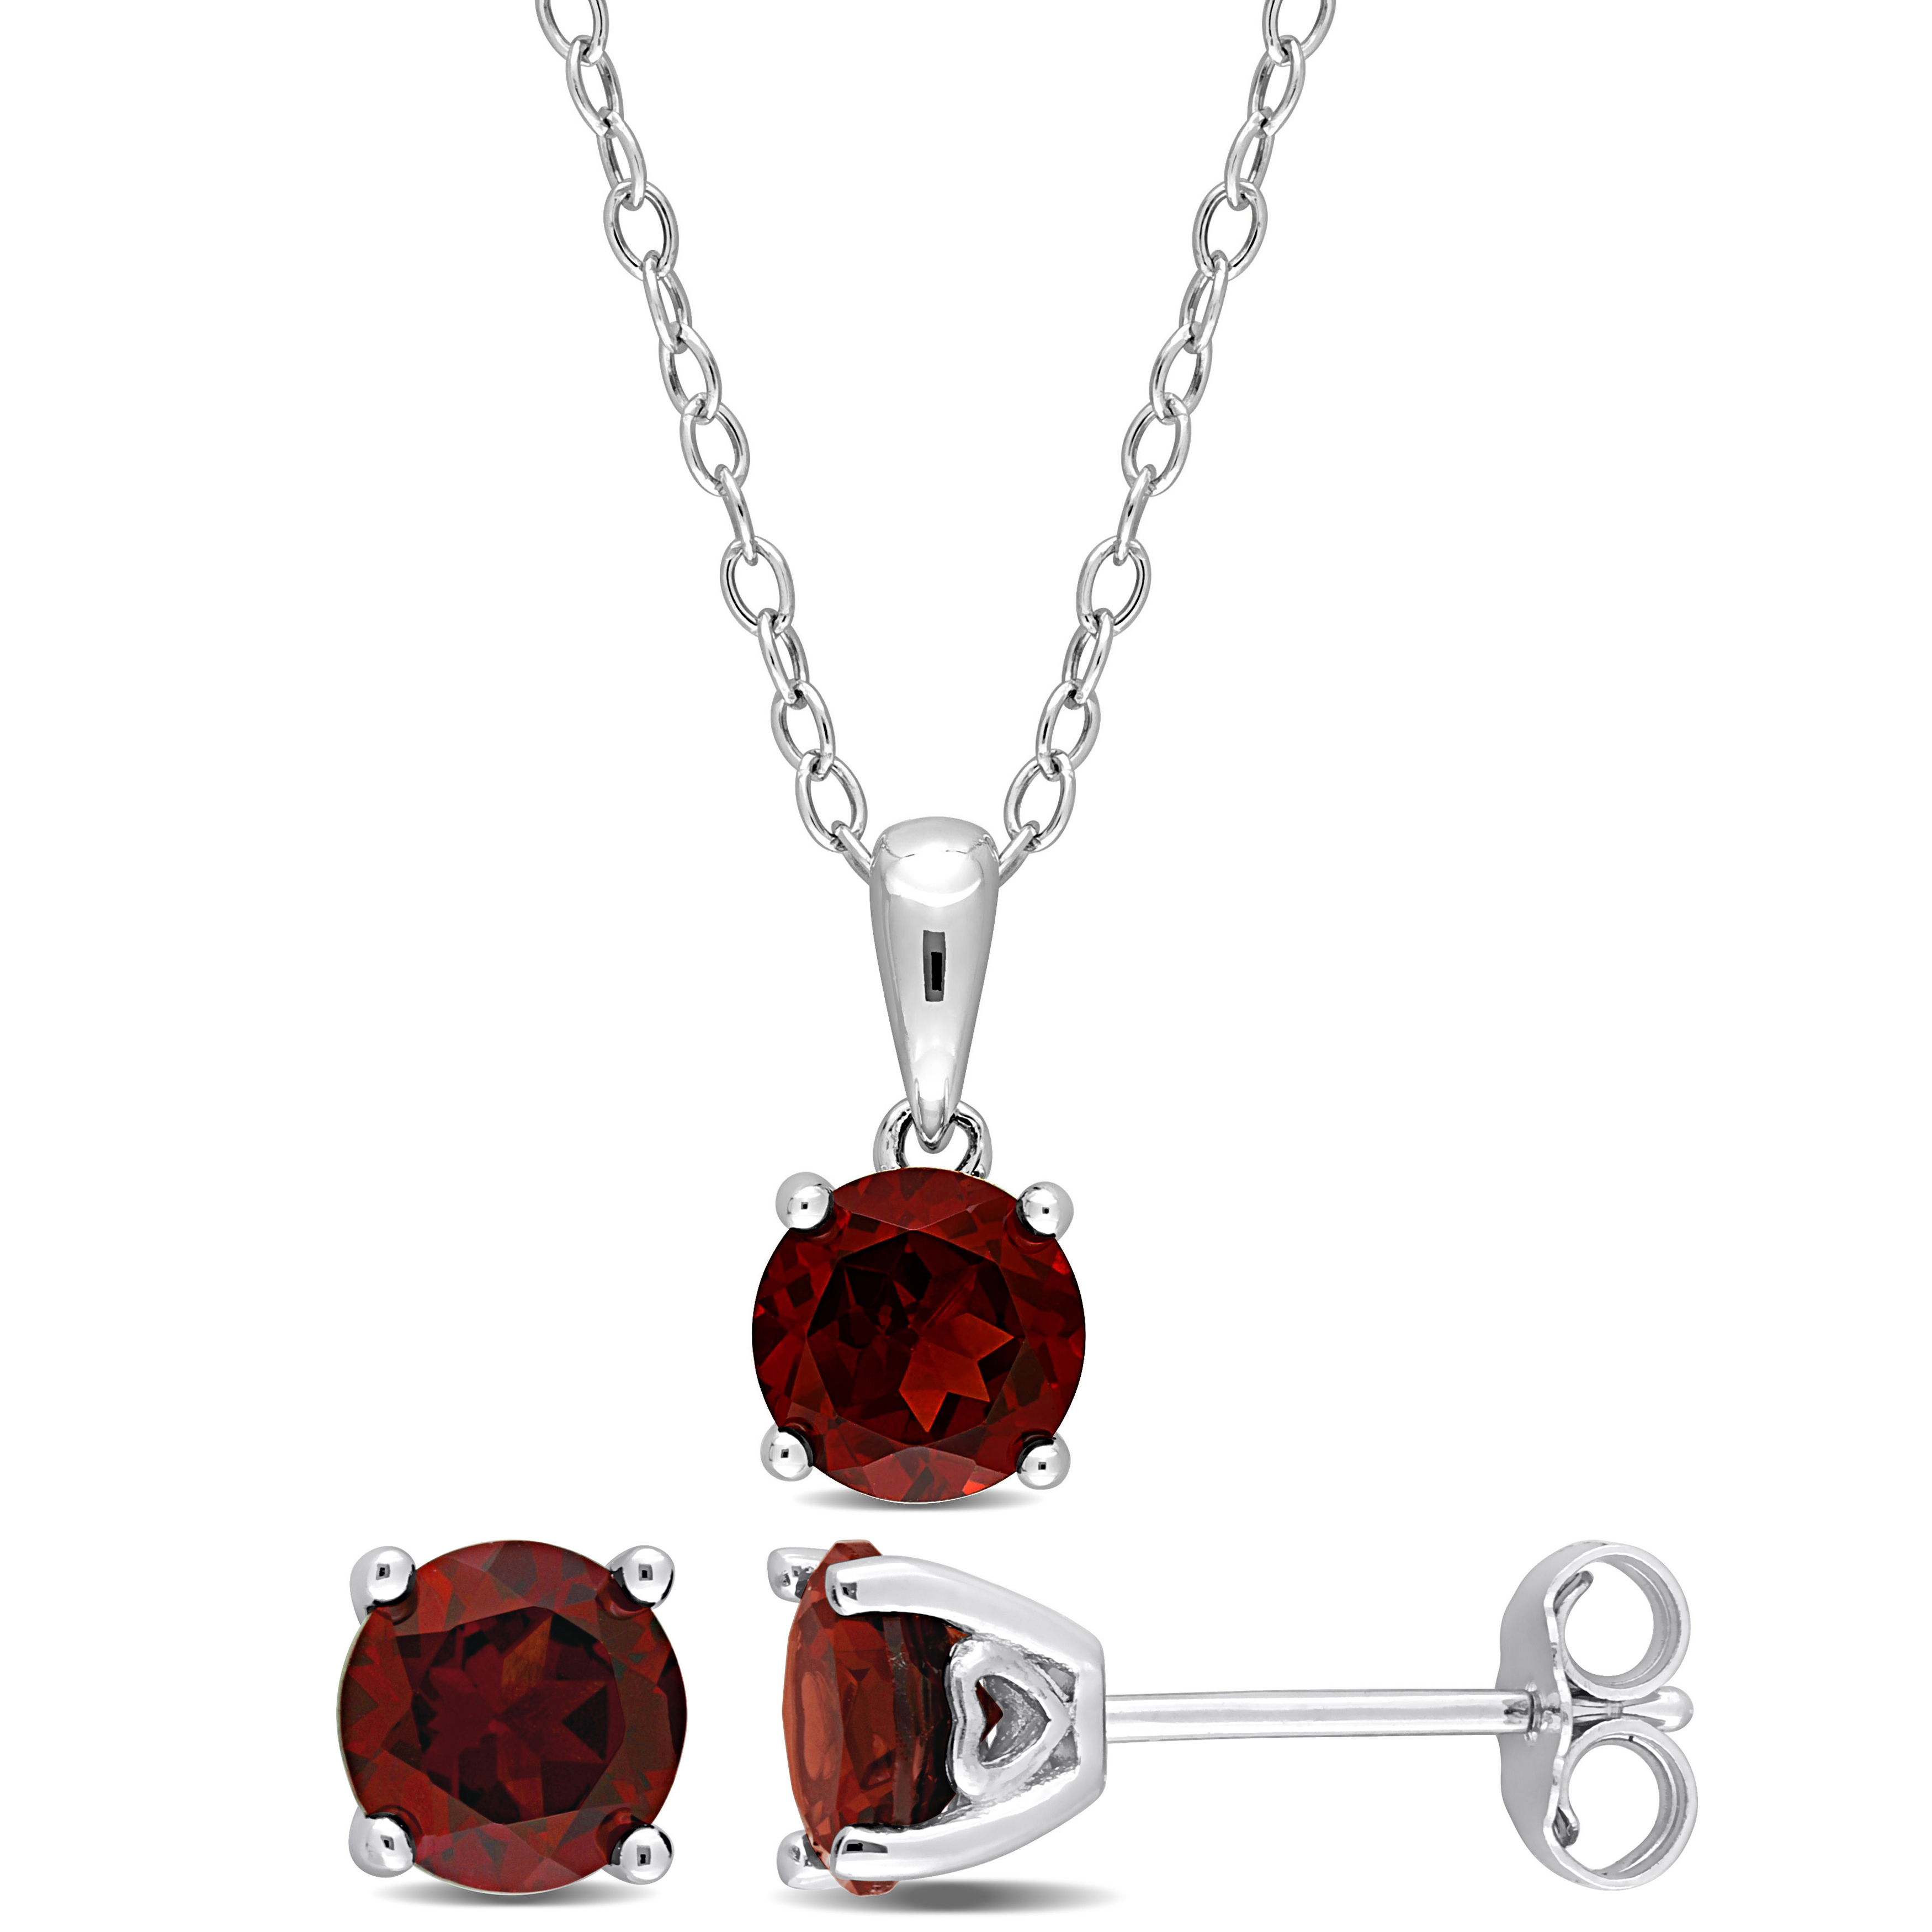 3 CT TGW Garnet 2-Piece Set of Pendant with Chain and Earrings in Sterling Silver